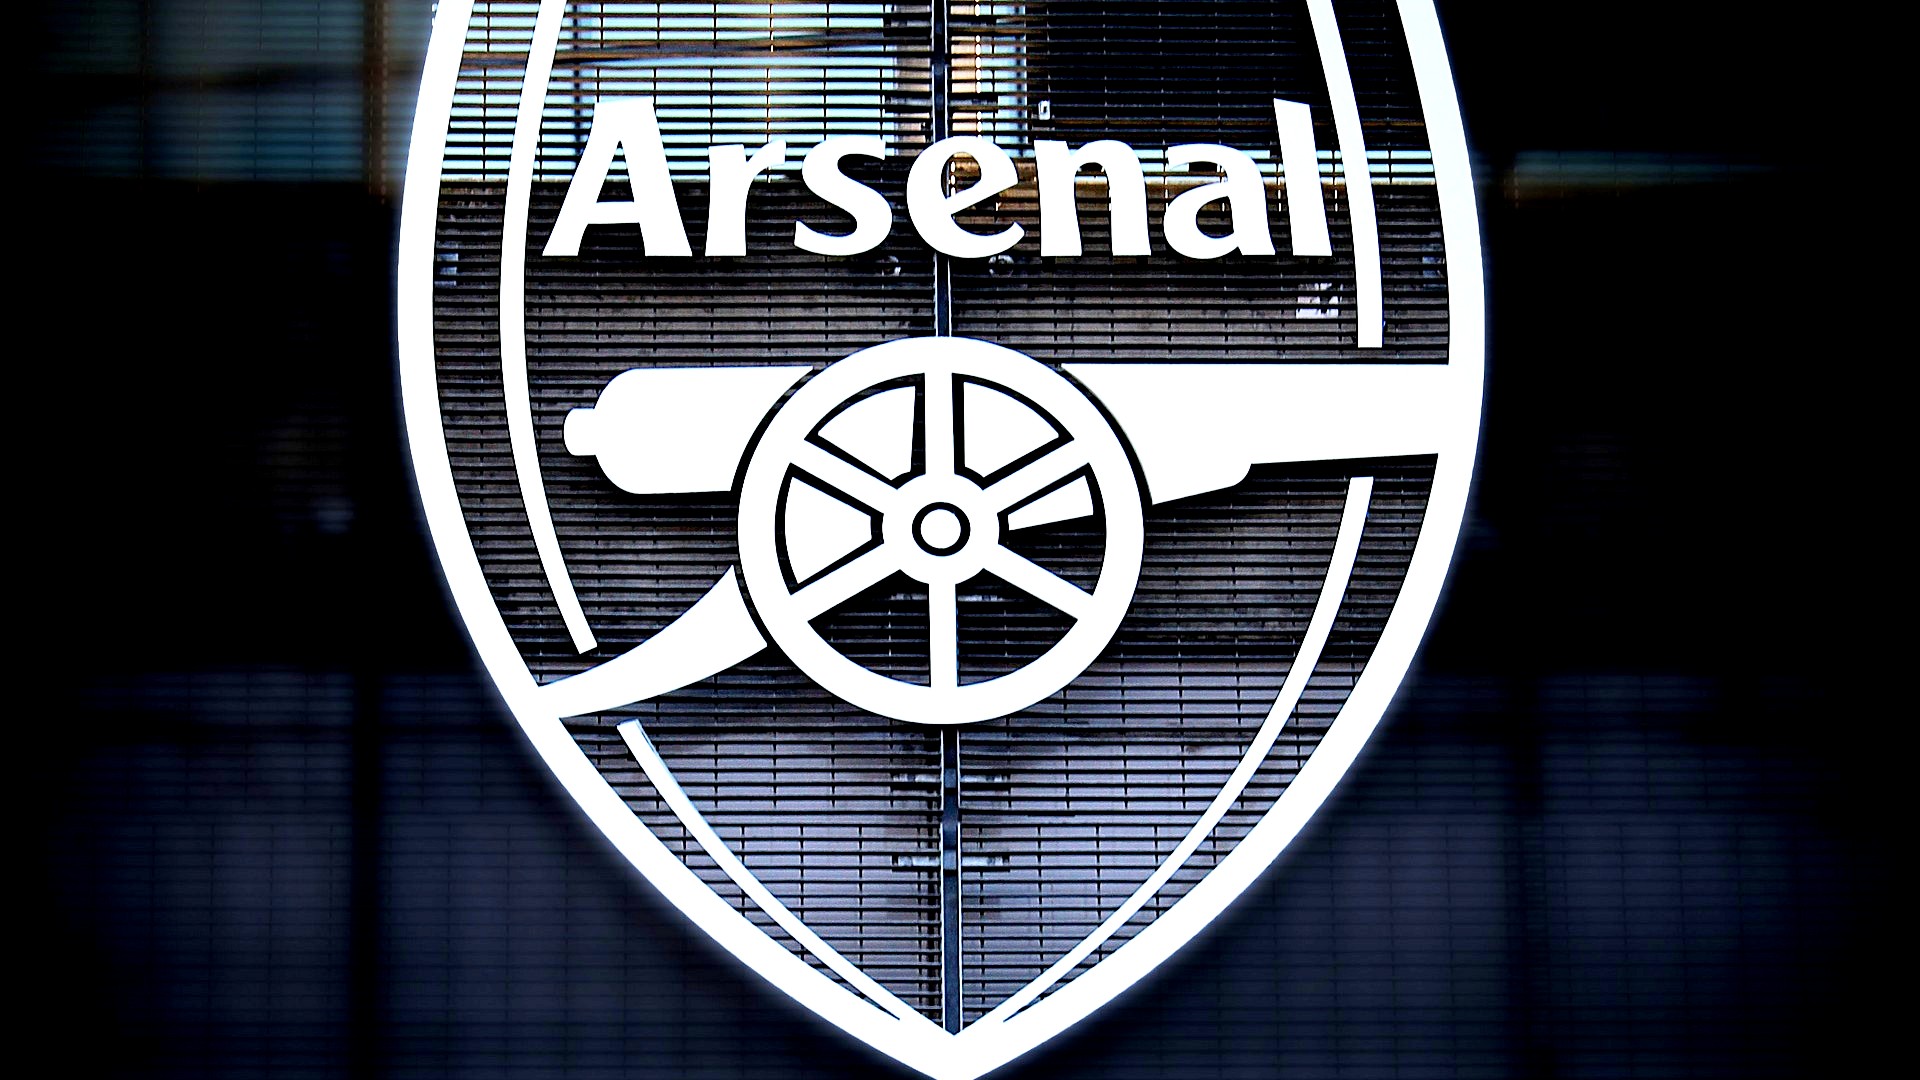 Windows Wallpaper Arsenal Football Club With high-resolution 1920X1080 pixel. You can use this wallpaper for your Desktop Computers, Mac Screensavers, Windows Backgrounds, iPhone Wallpapers, Tablet or Android Lock screen and another Mobile device